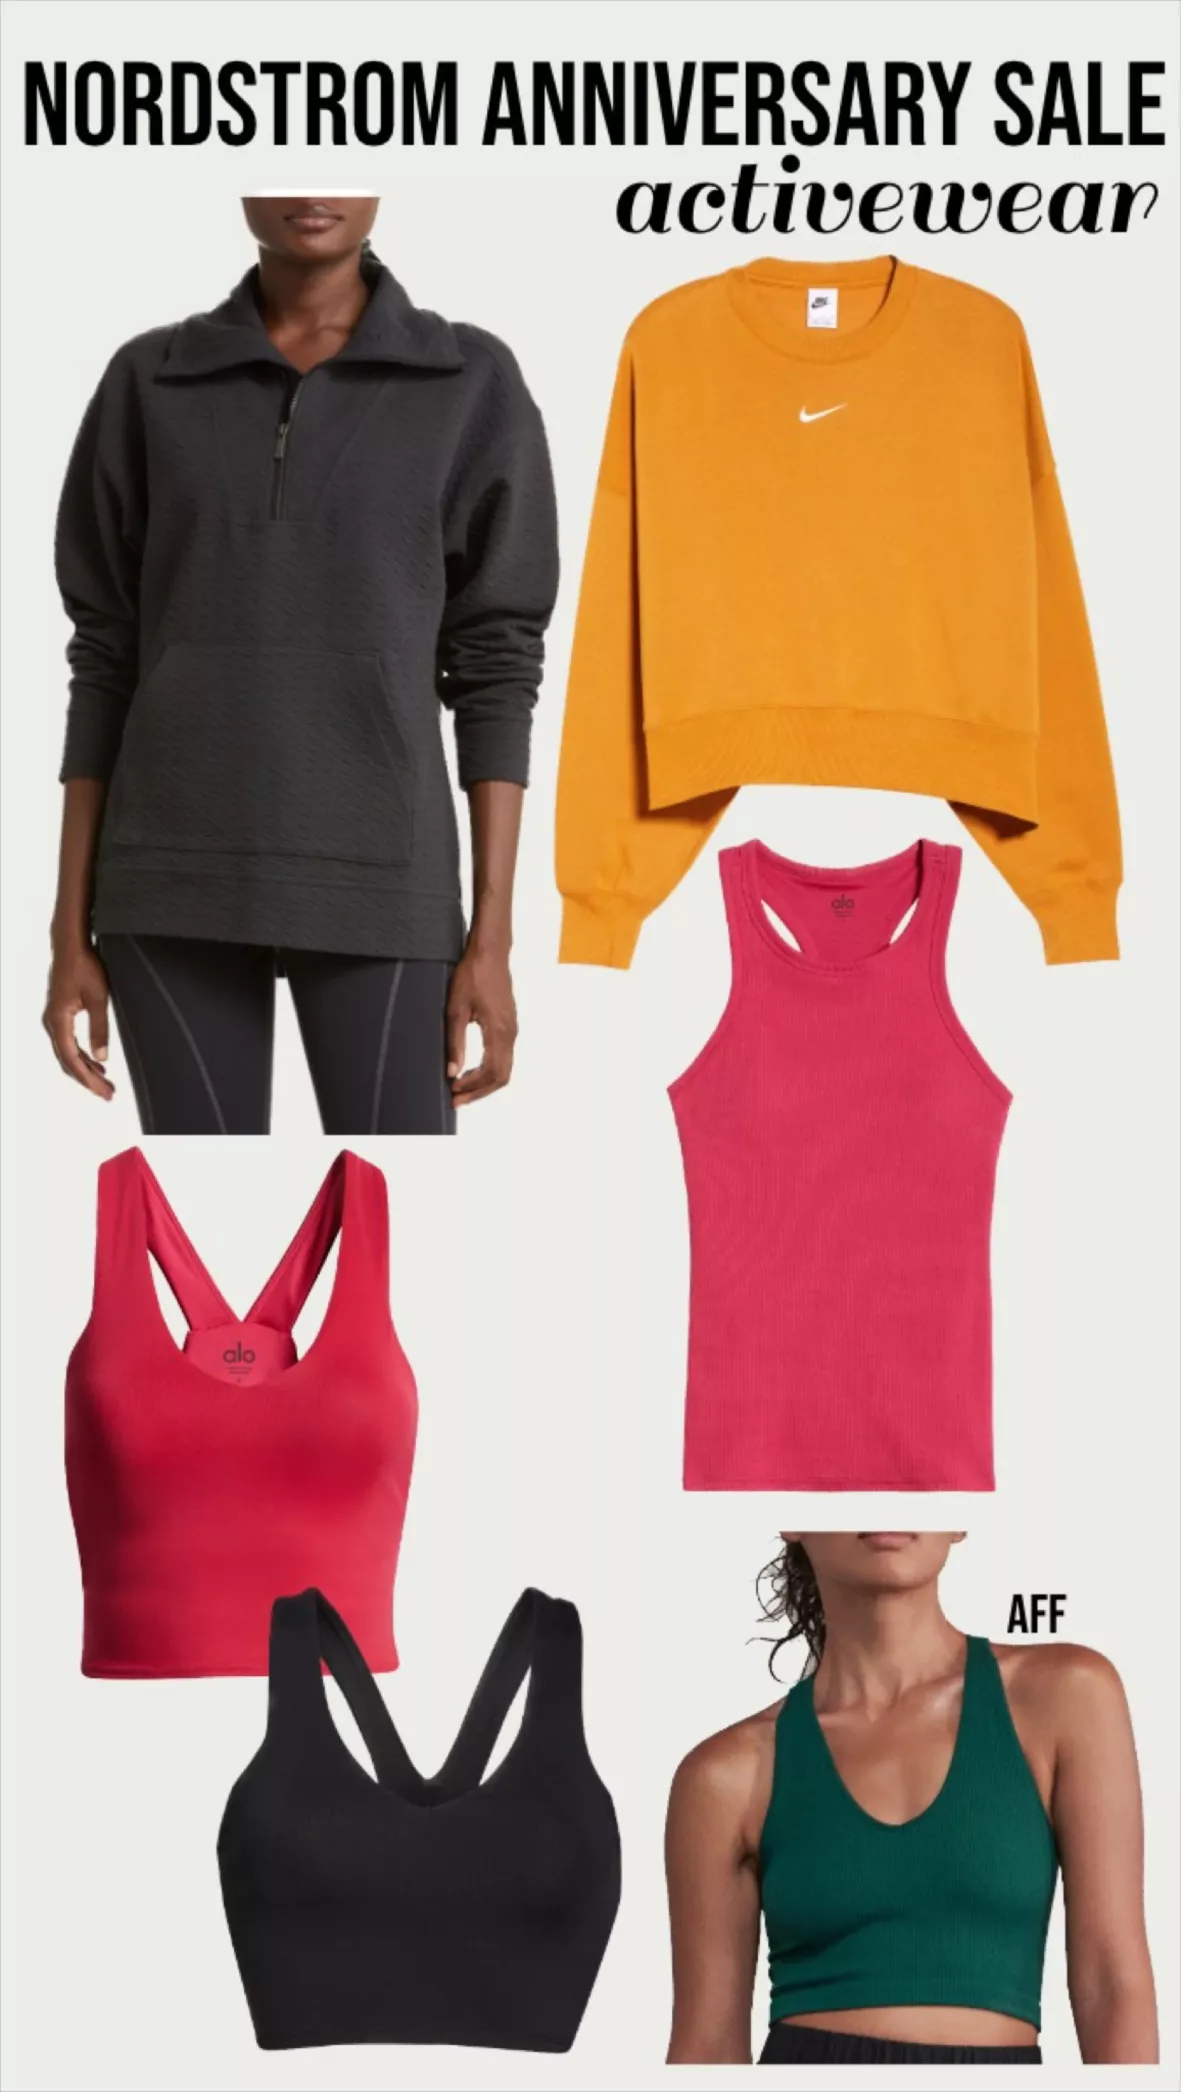 ALO Pullover Activewear Tops for Women for sale